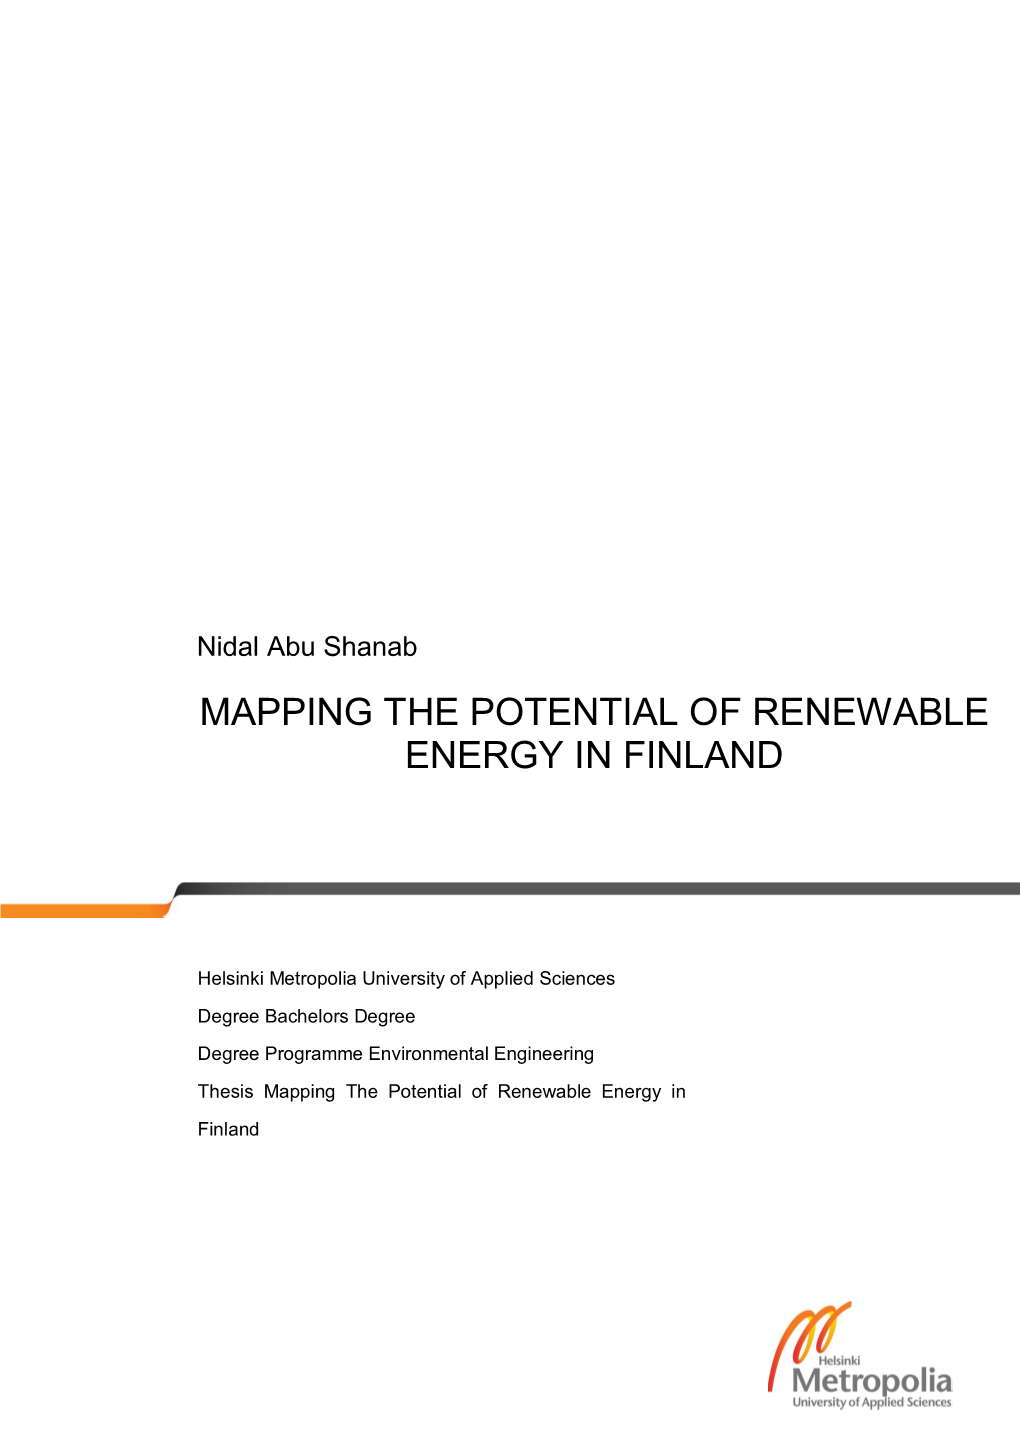 Mapping the Potential of Renewable Energy in Finland